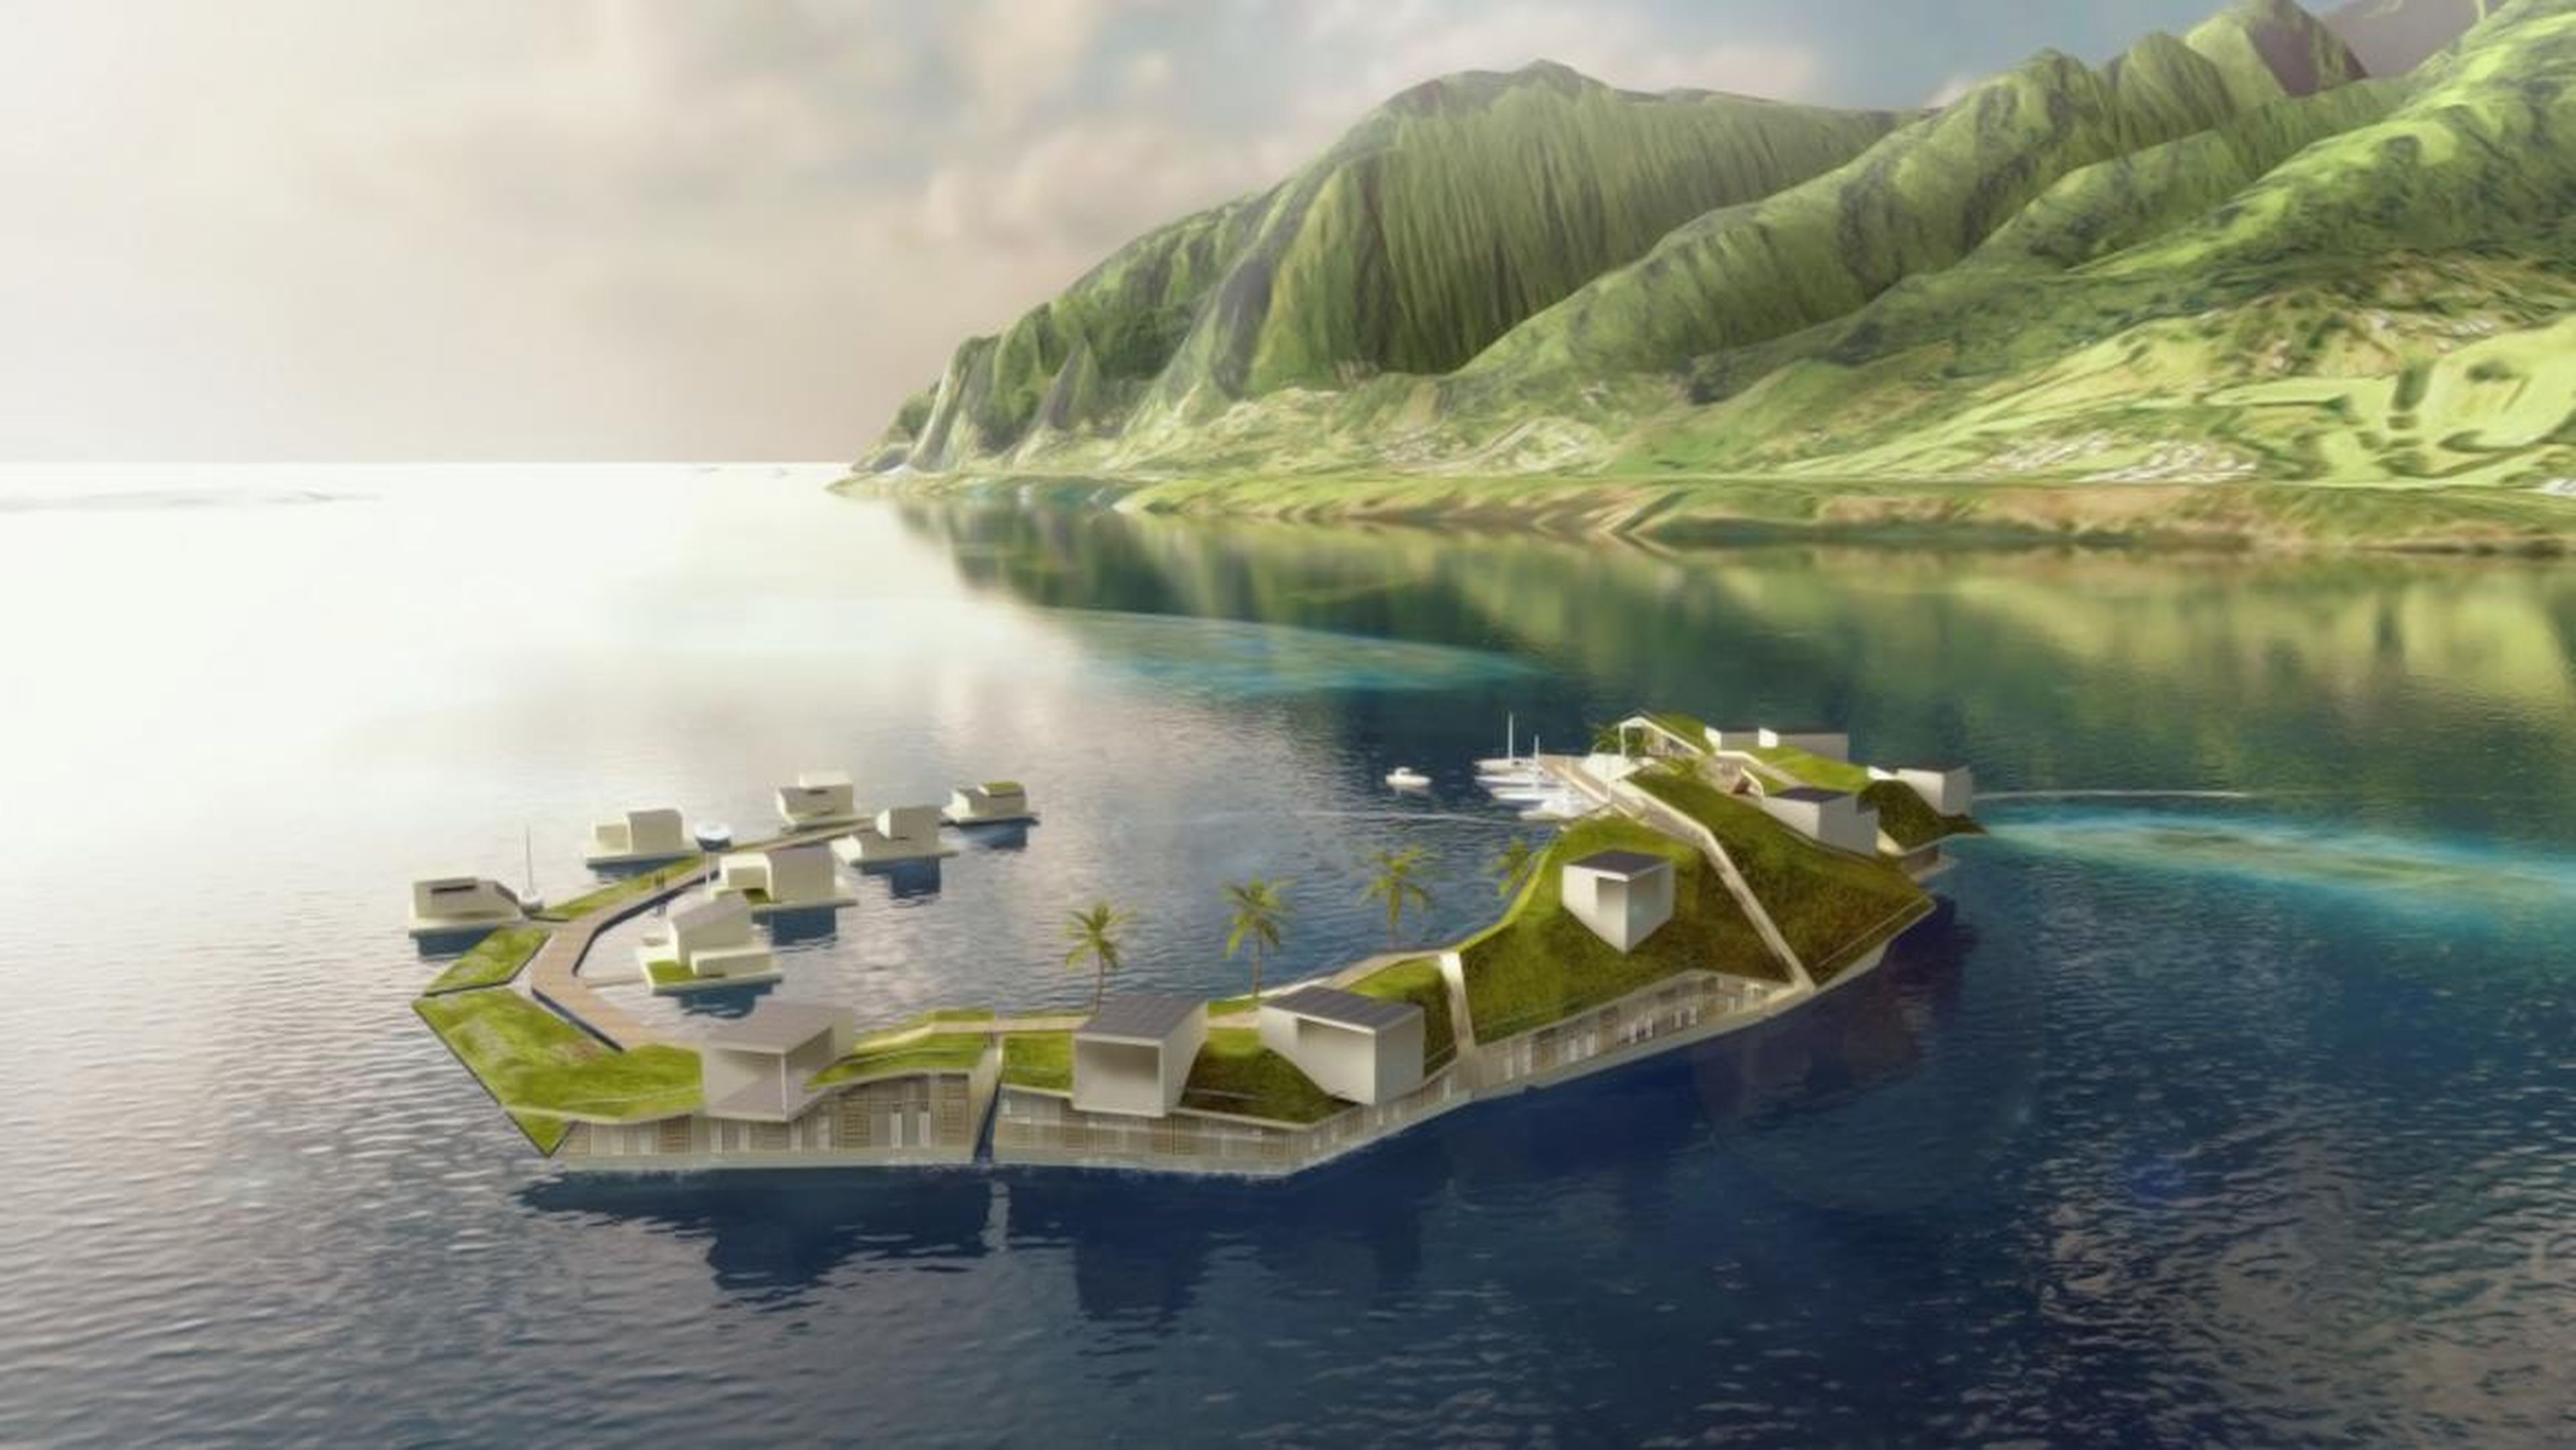 The Seasteading Institute aims to build self-sufficient floating cities.